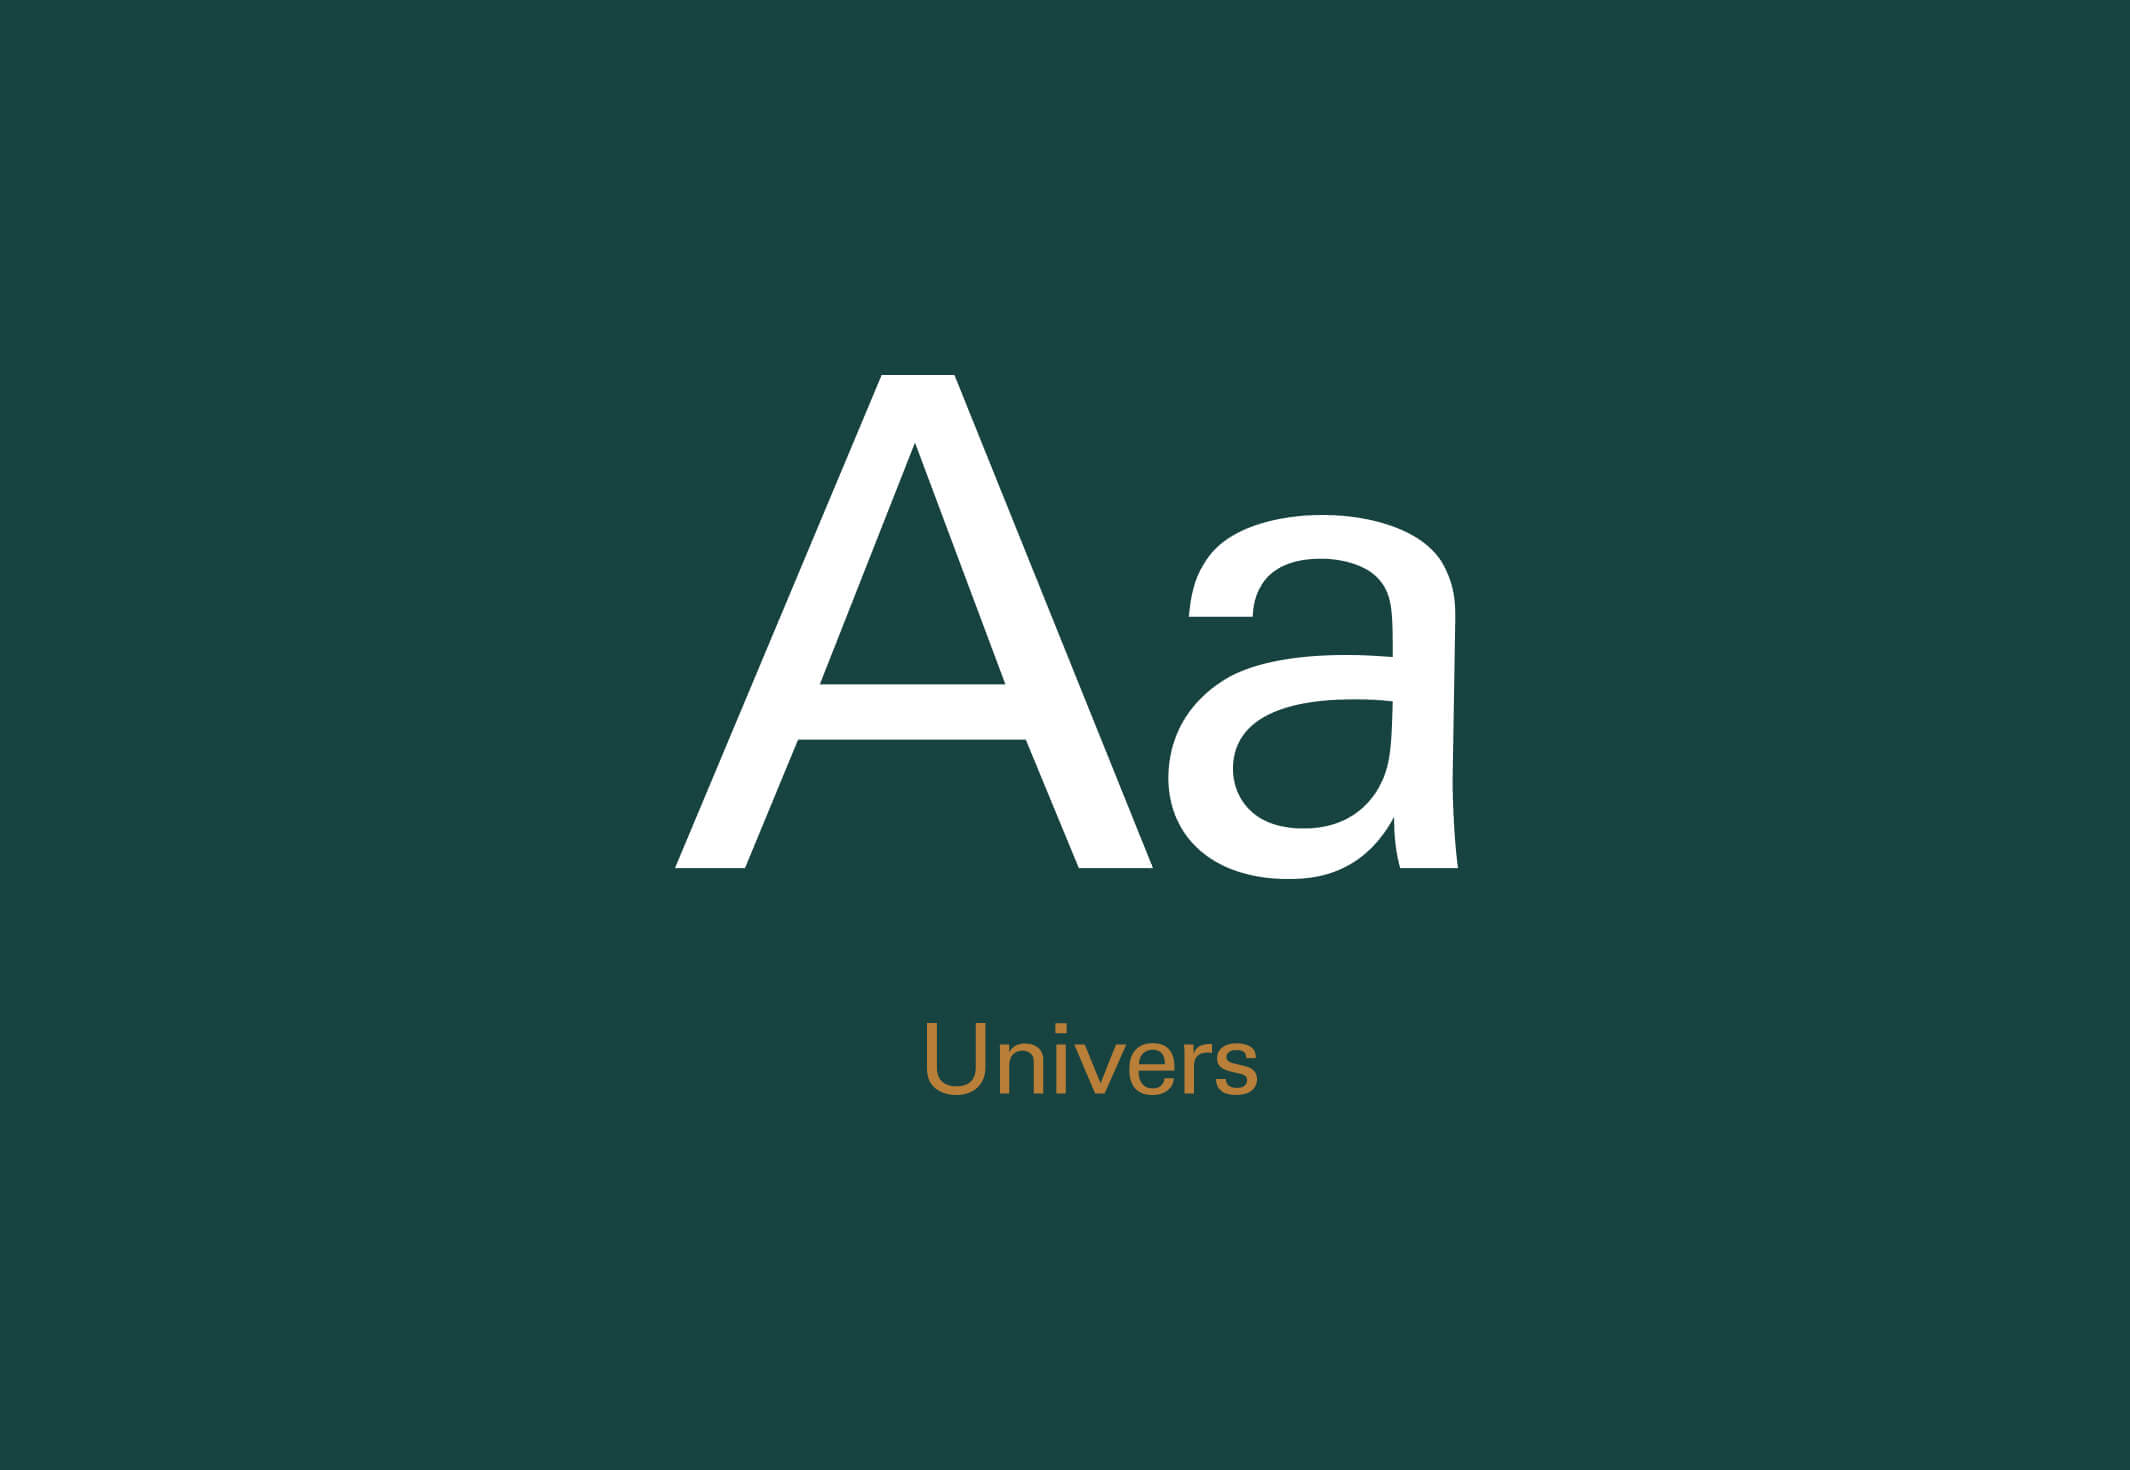 A letterform of the letter A for the font Univers.